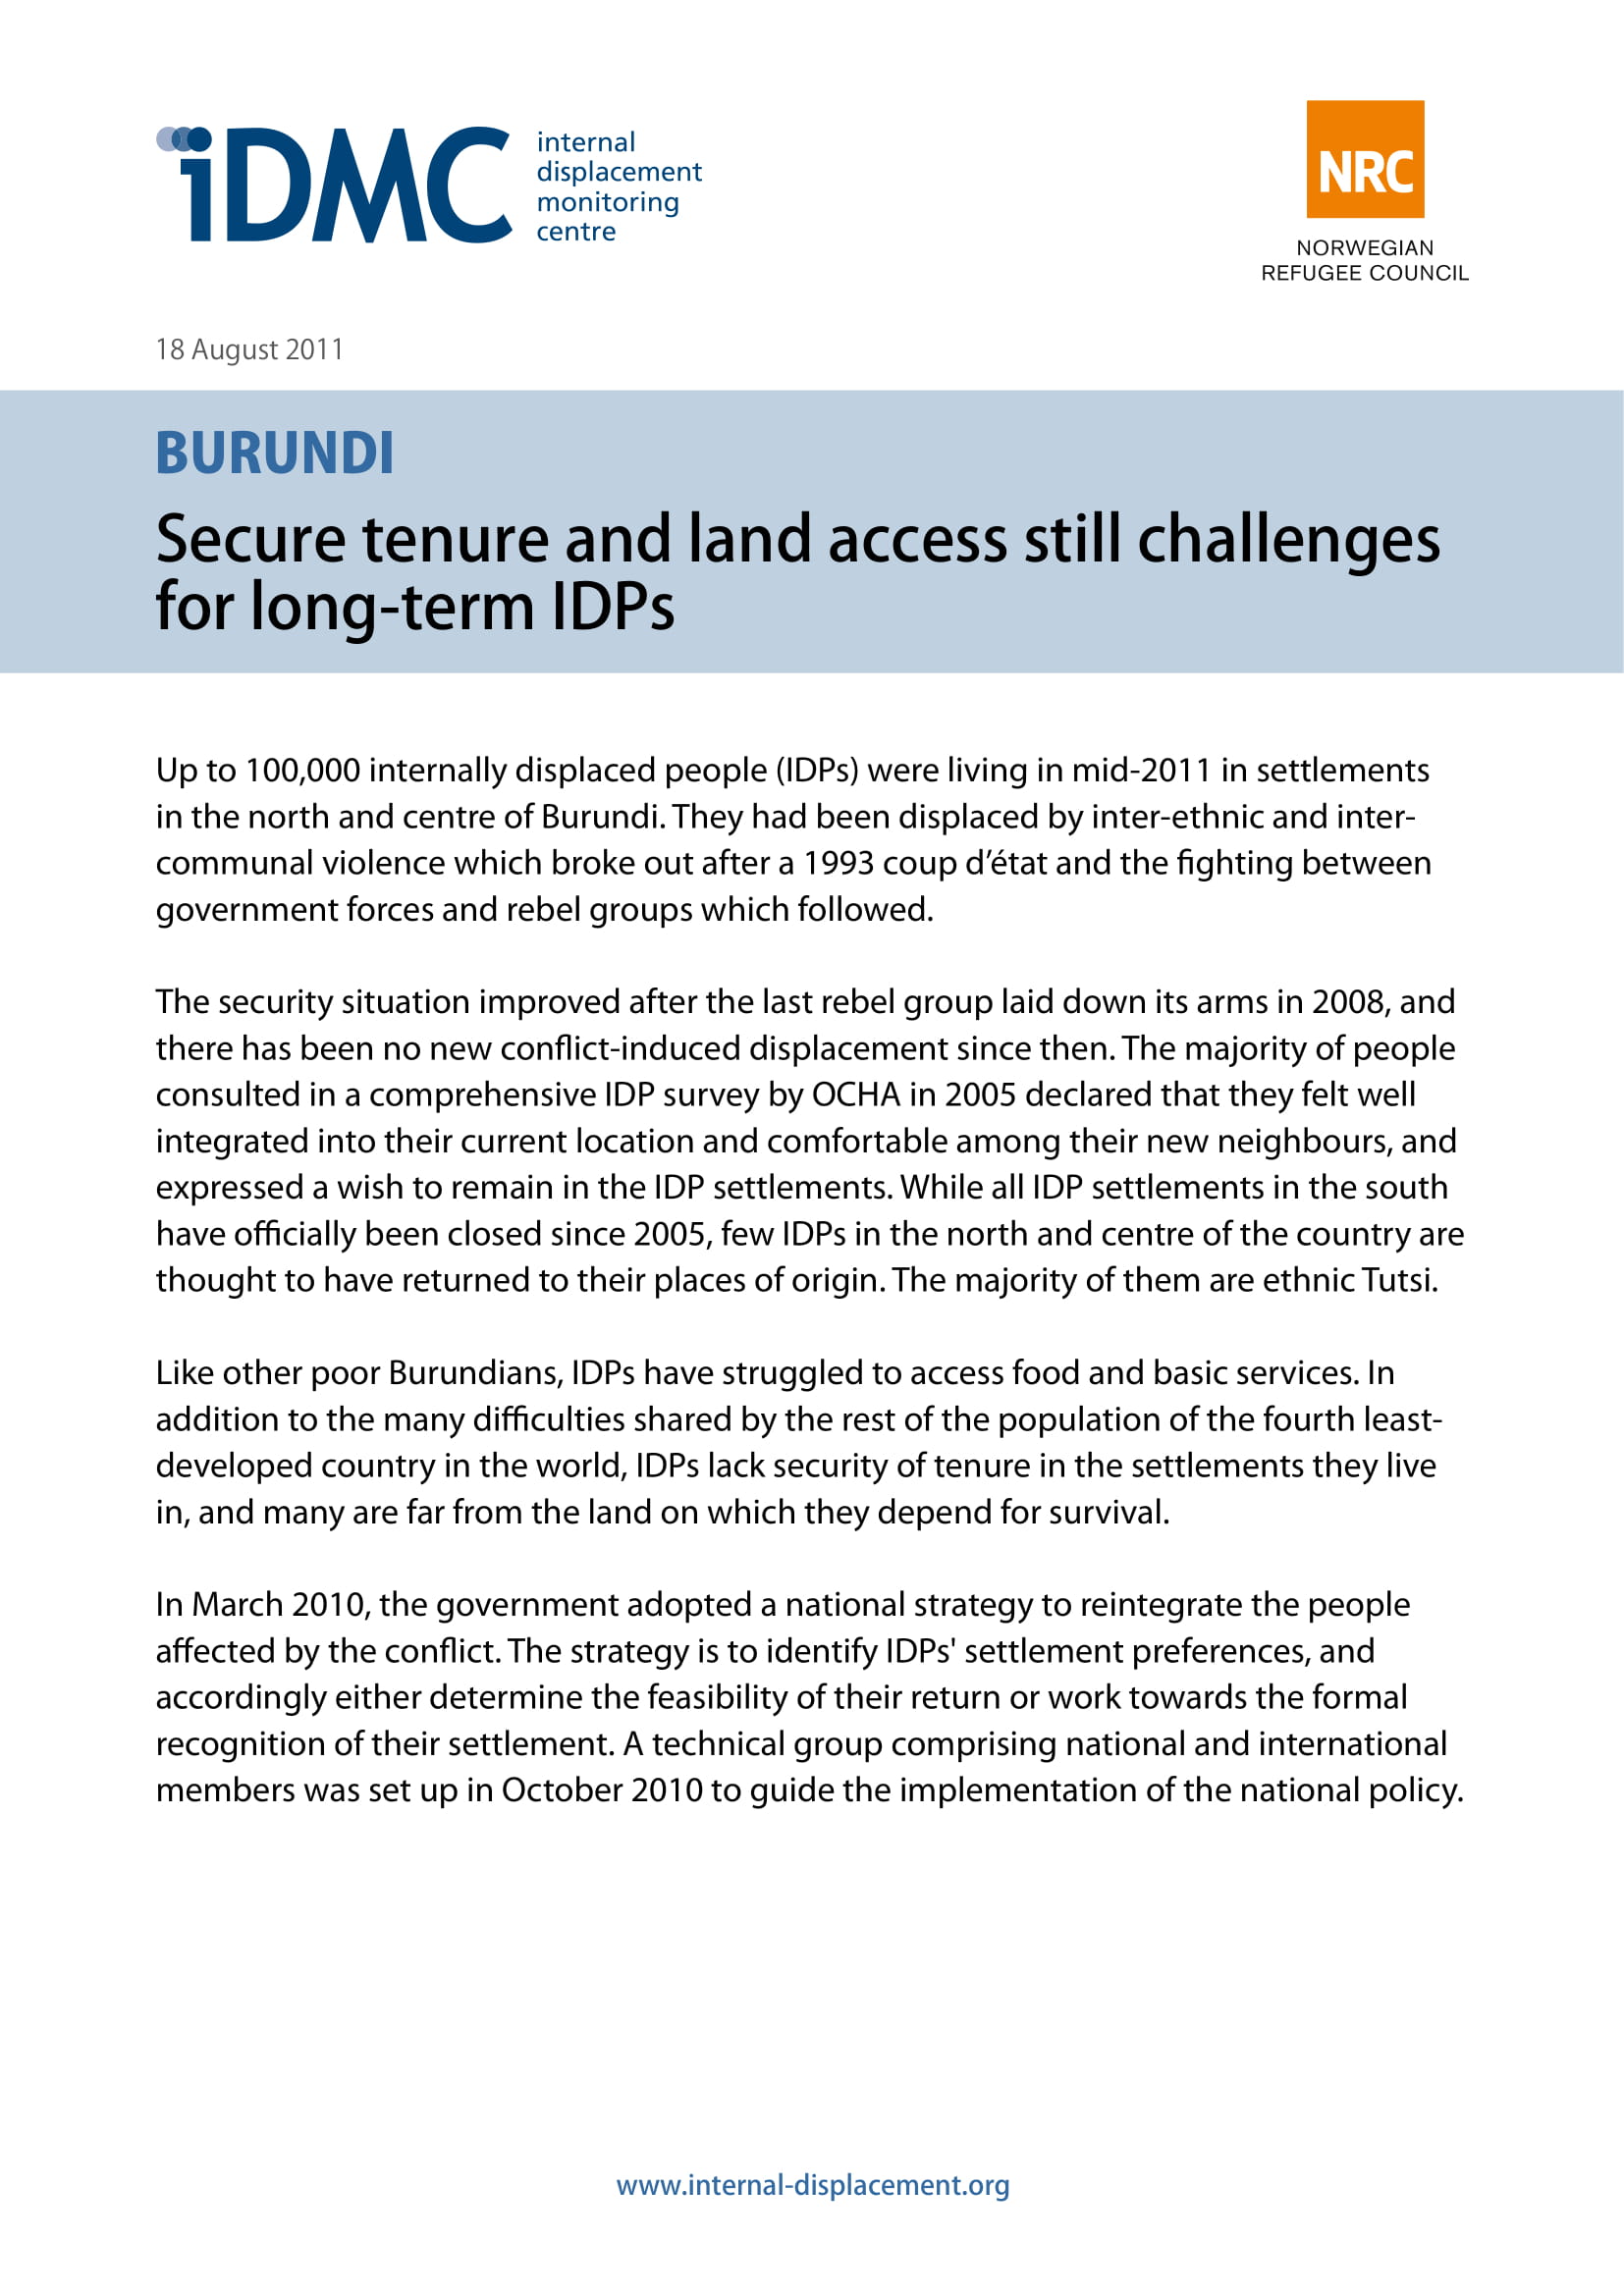 Burundi: Secure tenure and land access still challenges for long-term IDPs